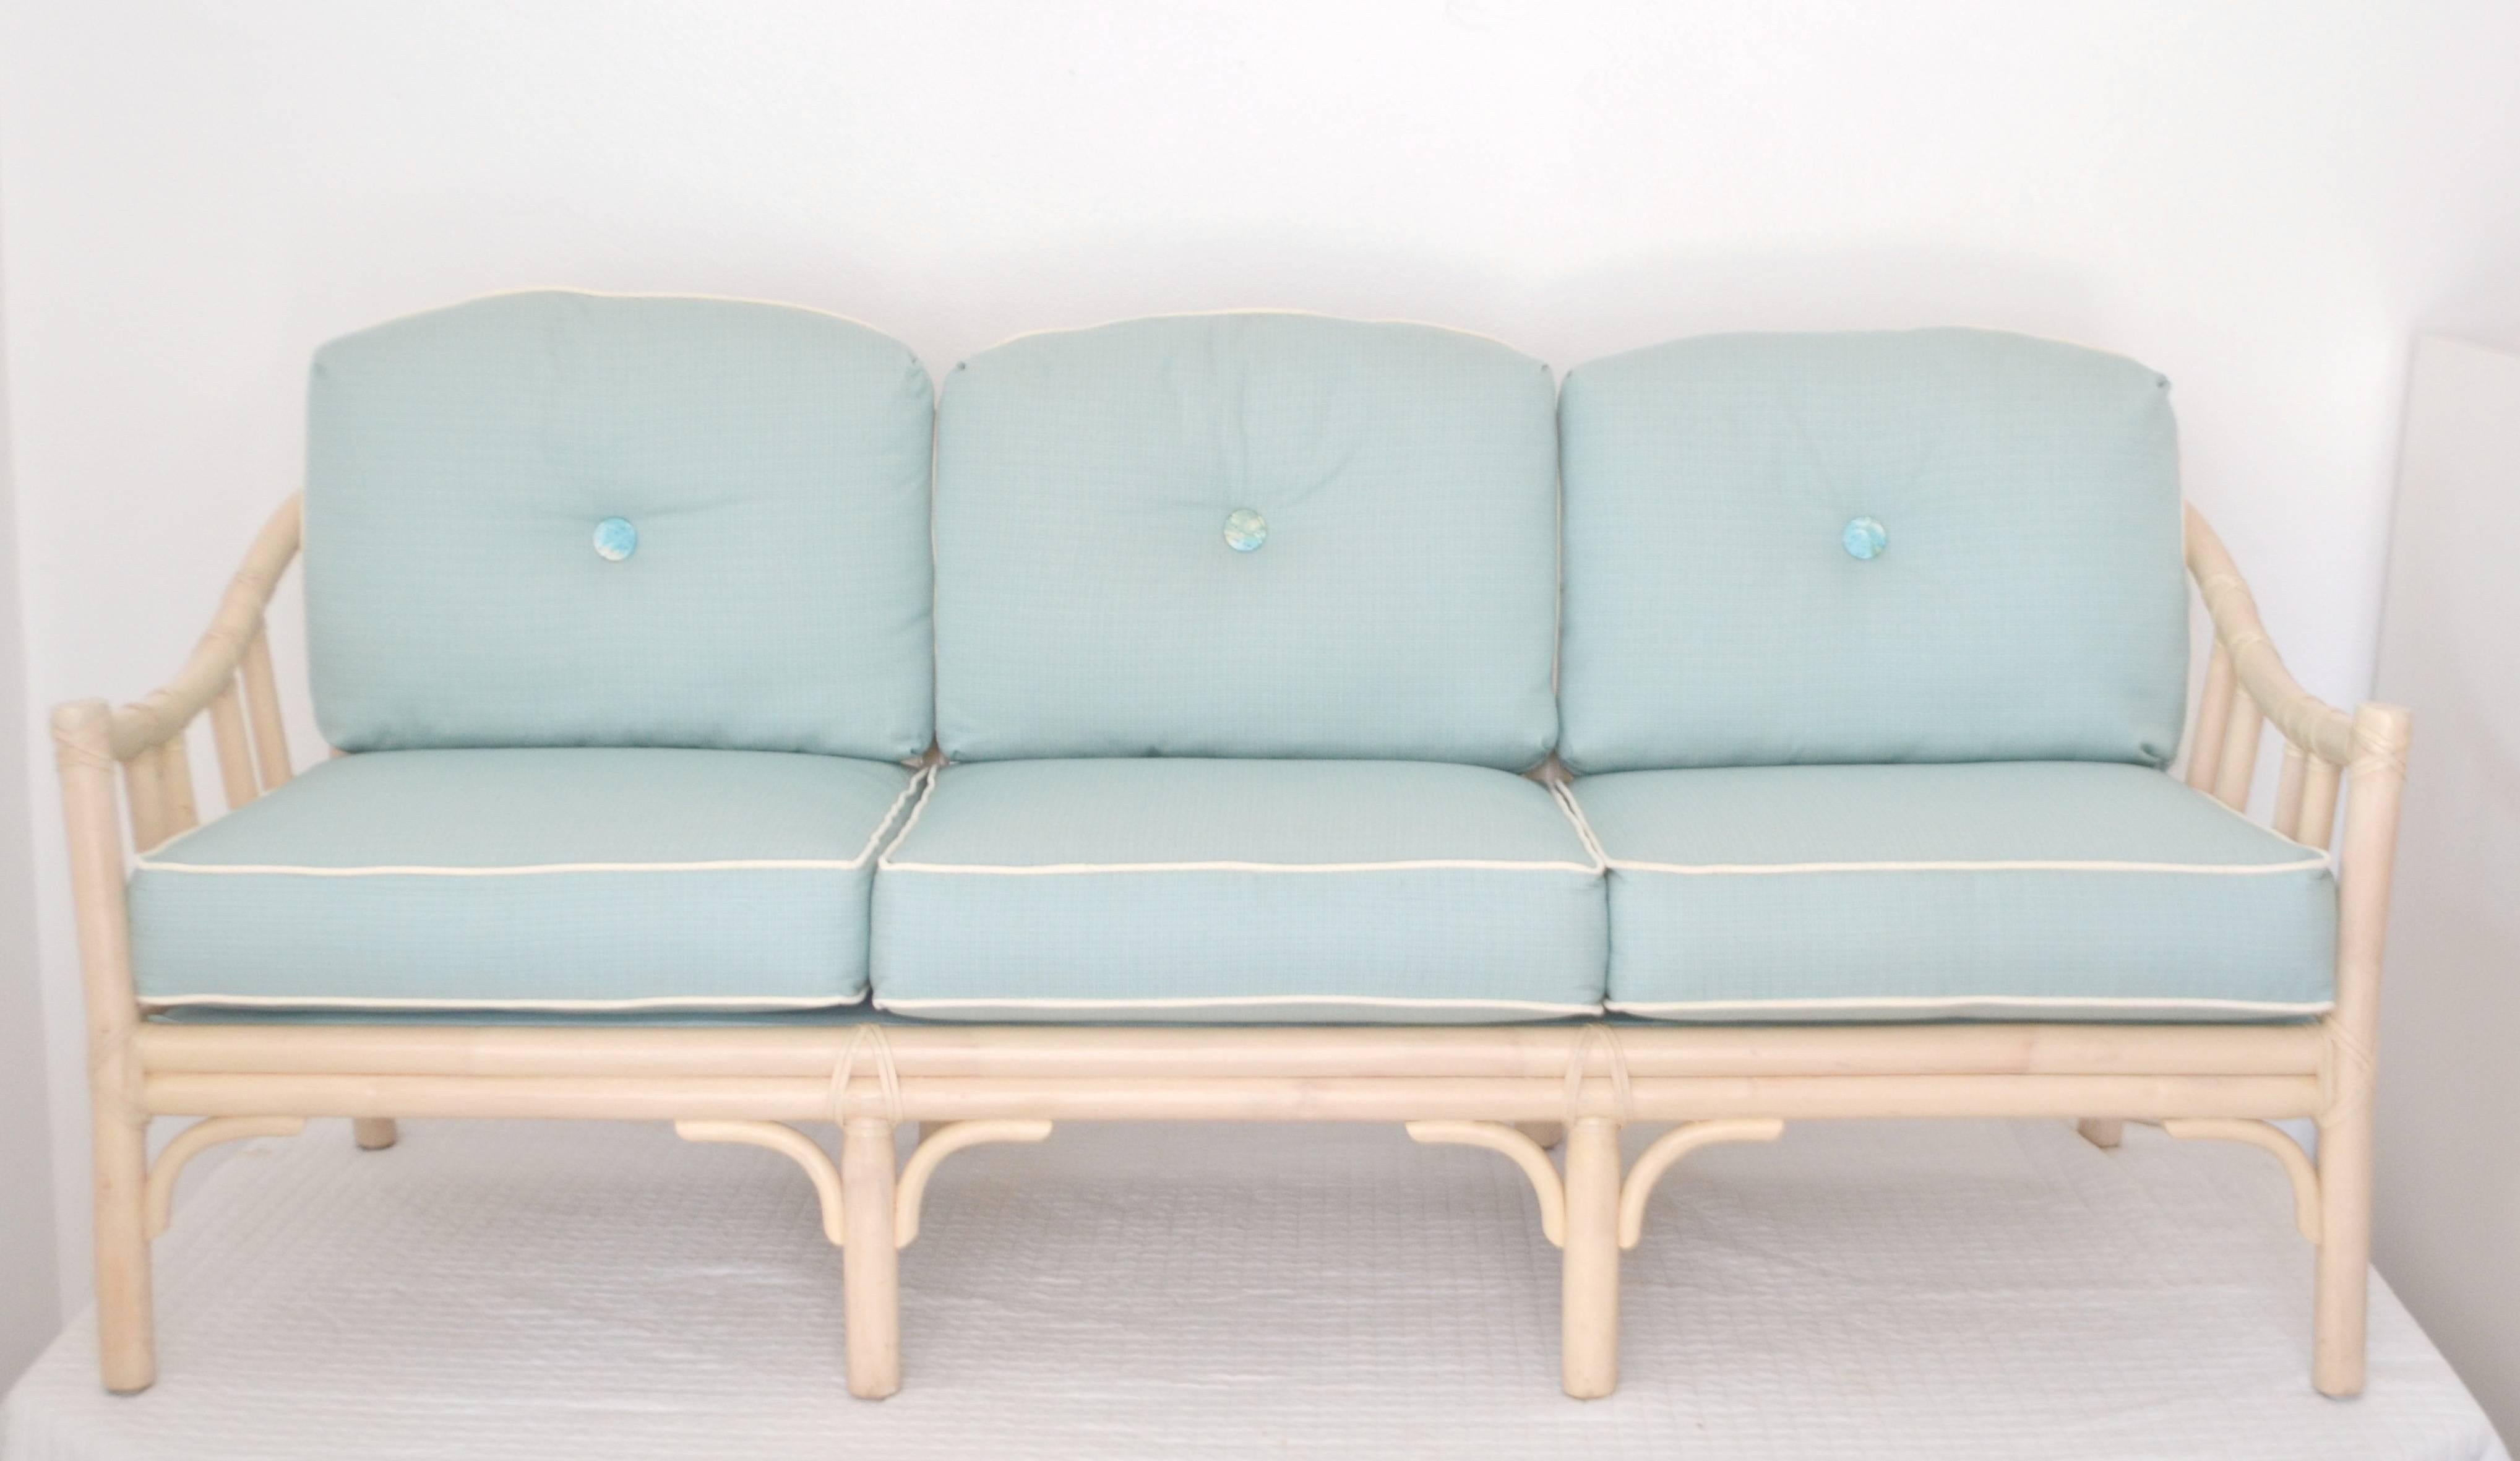 Mid-Century bamboo and leather wrapped three-seat sofa or settee by McGuire, circa 1960s-1970s. This artisan crafted whitewashed bamboo framed settee is accented with azure blue cushions finished with a contrasting white welt.